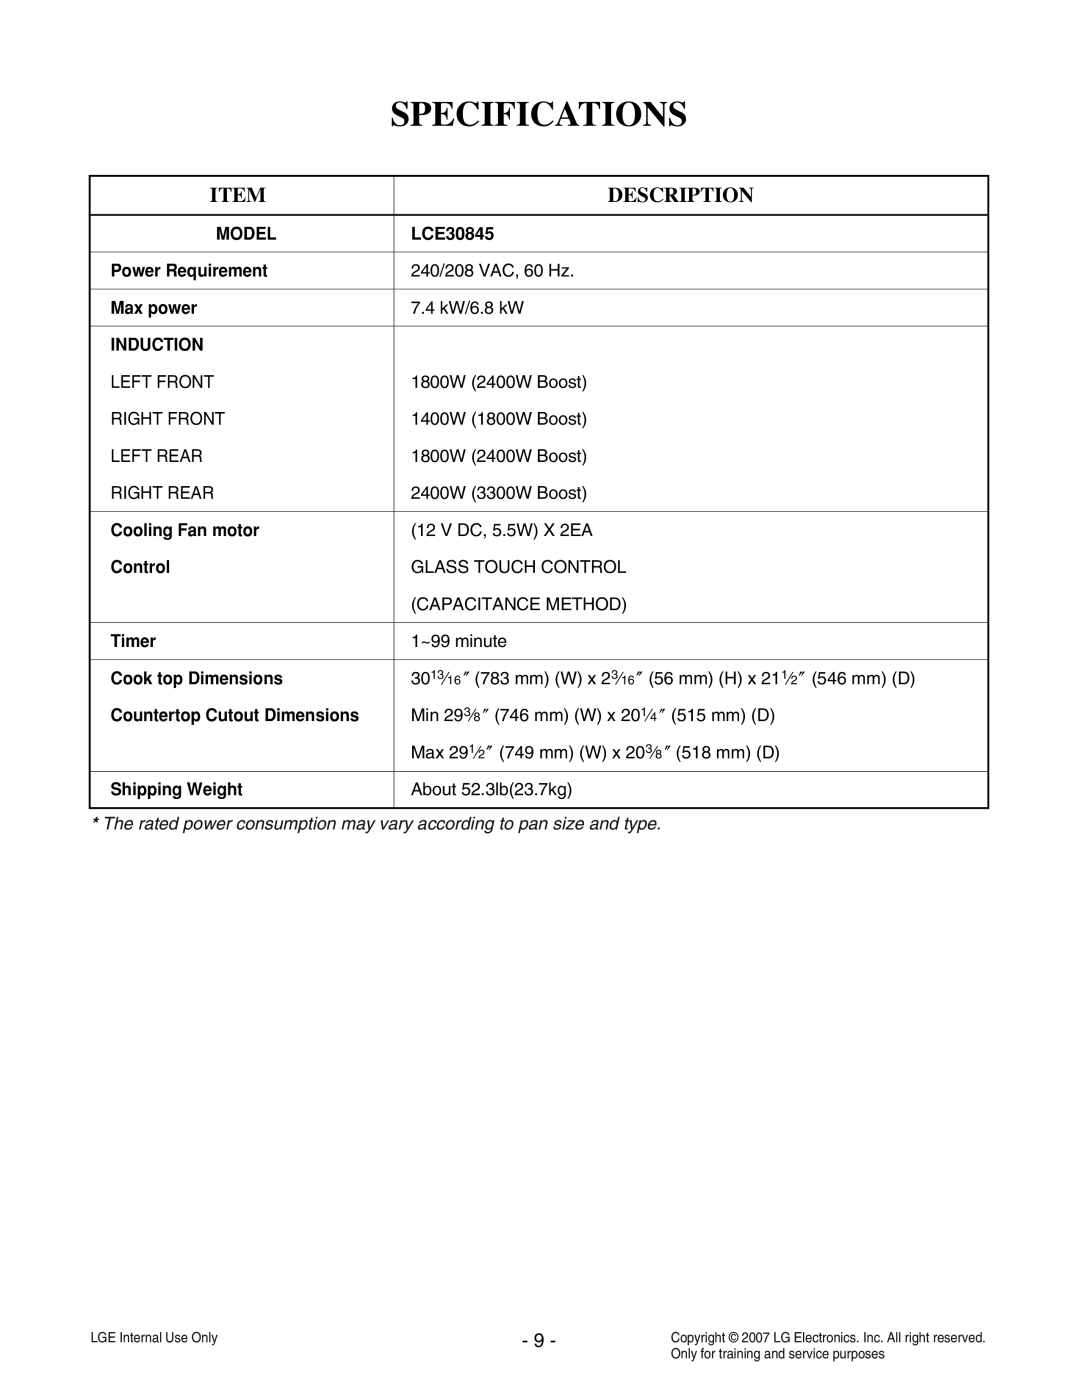 LG Electronics LCE30845 Specifications, Description, The rated power consumption may vary according to pan size and type 